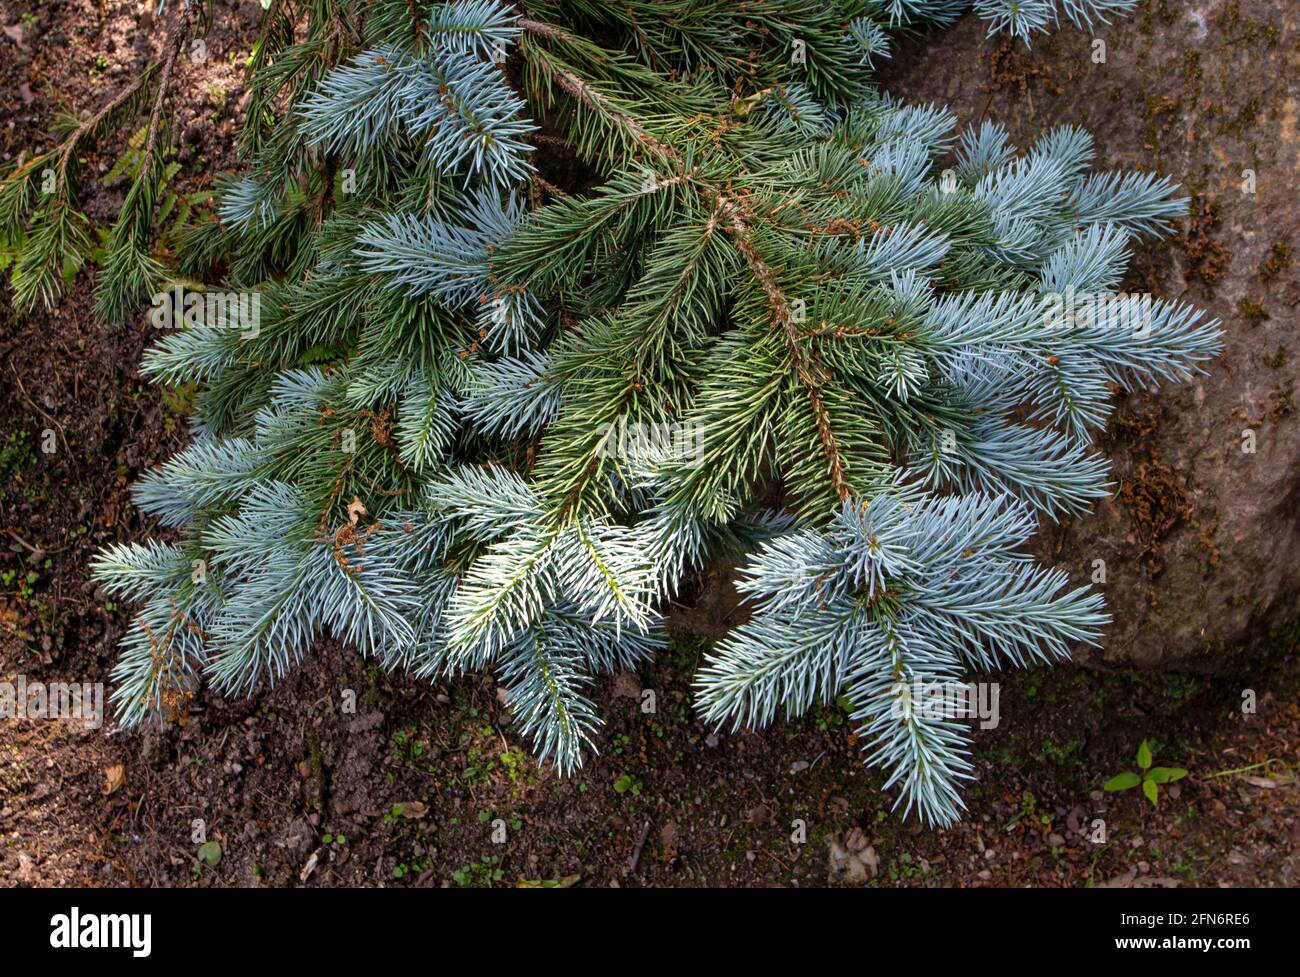 Blue spruce or picea pungens branch with blue-green coloured needles. Coniferous tree. Stock Photo